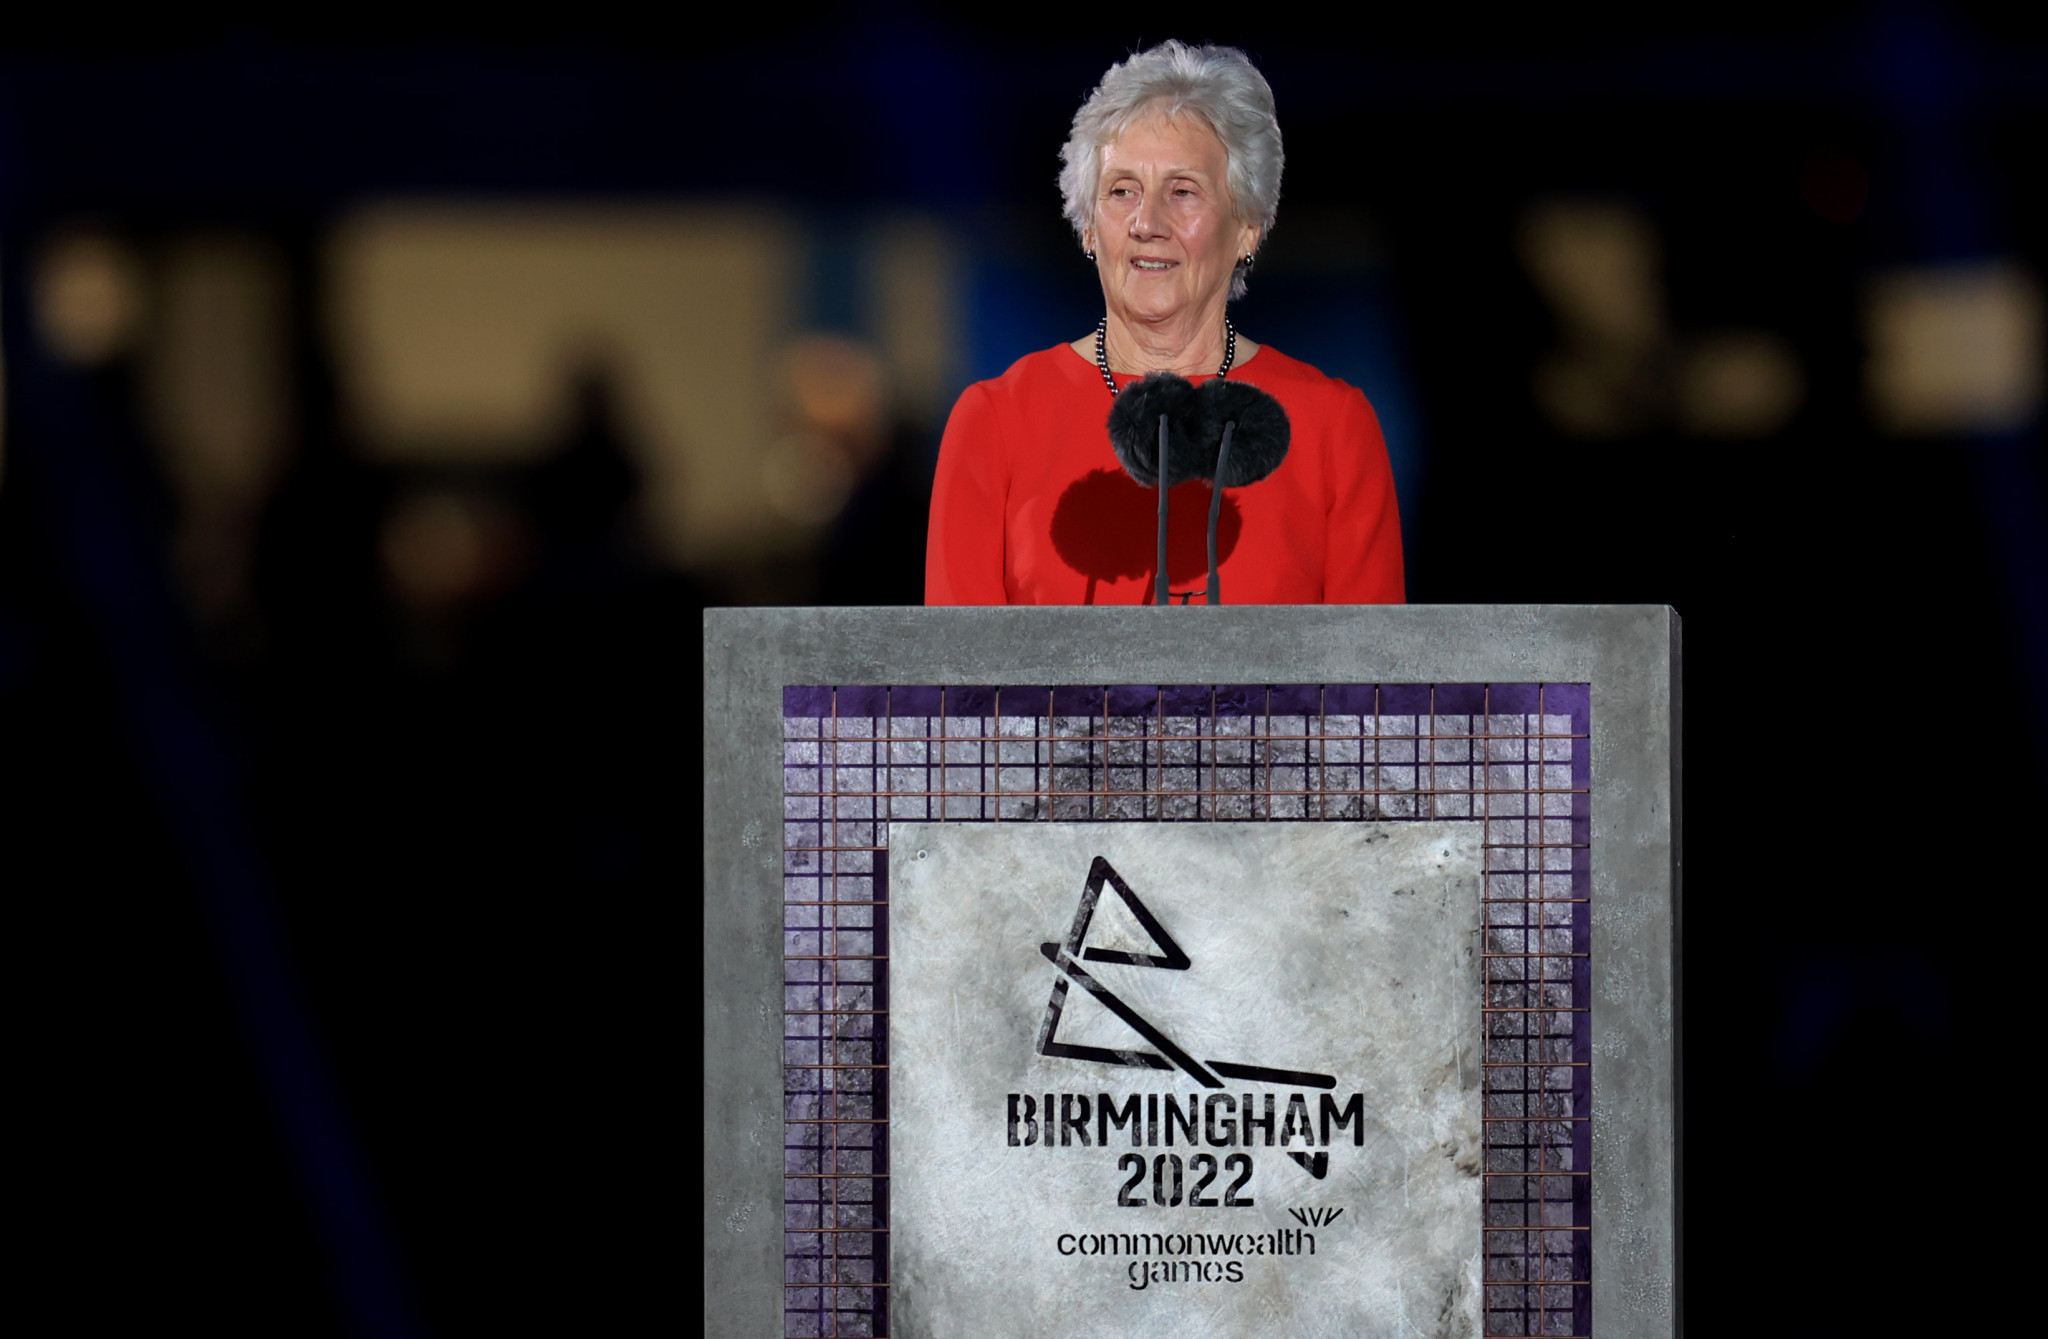 CGF President Dame Louise Martin said Birmingham 2022 was "bold, buzzing and absolutely brilliant" ©Getty Images